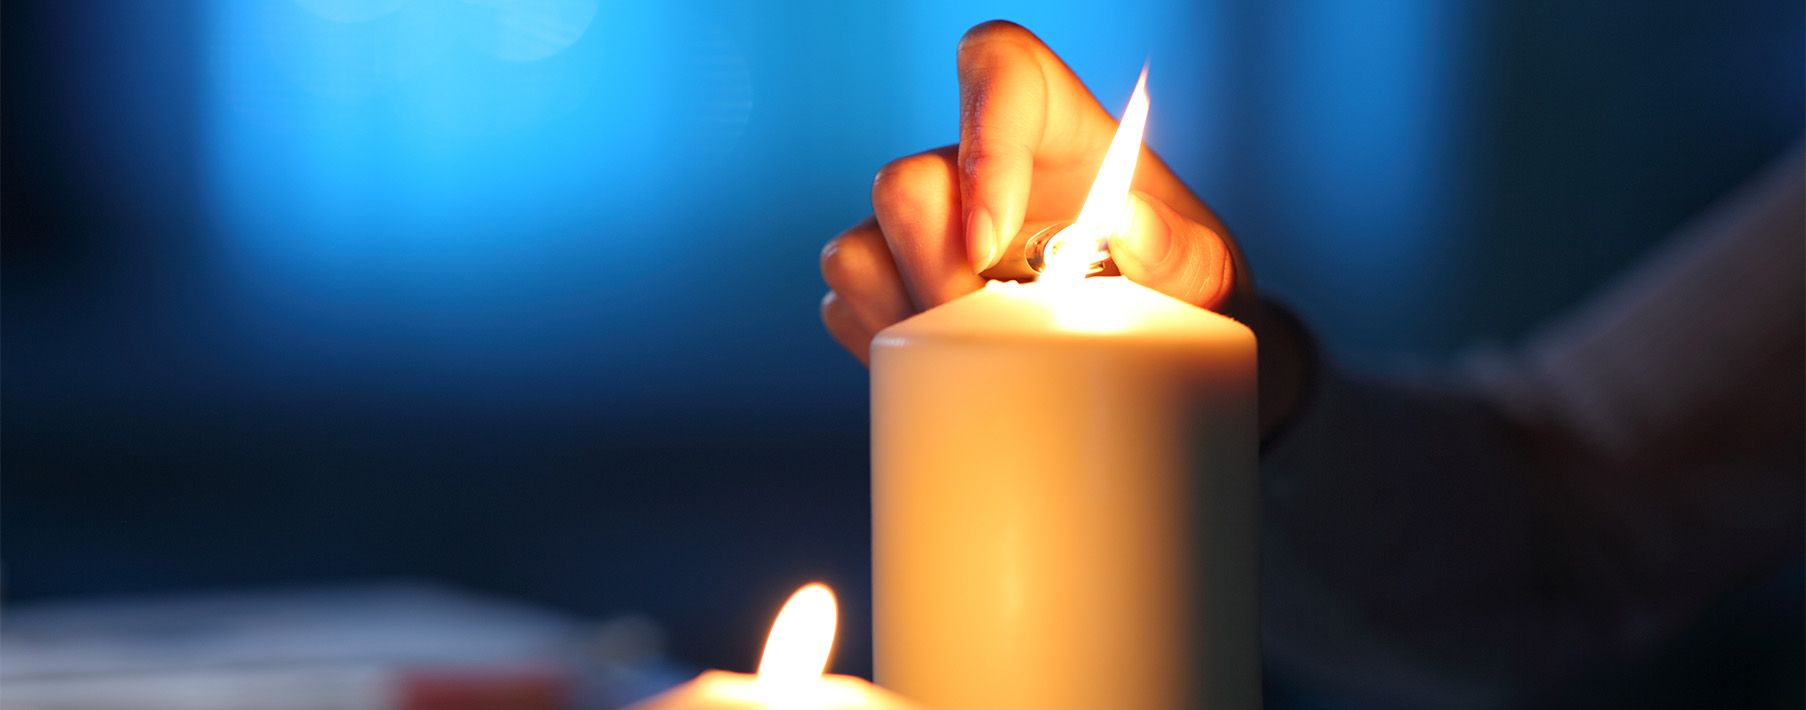 A close up image of a person's hand using a lighter to light a candle in the dark